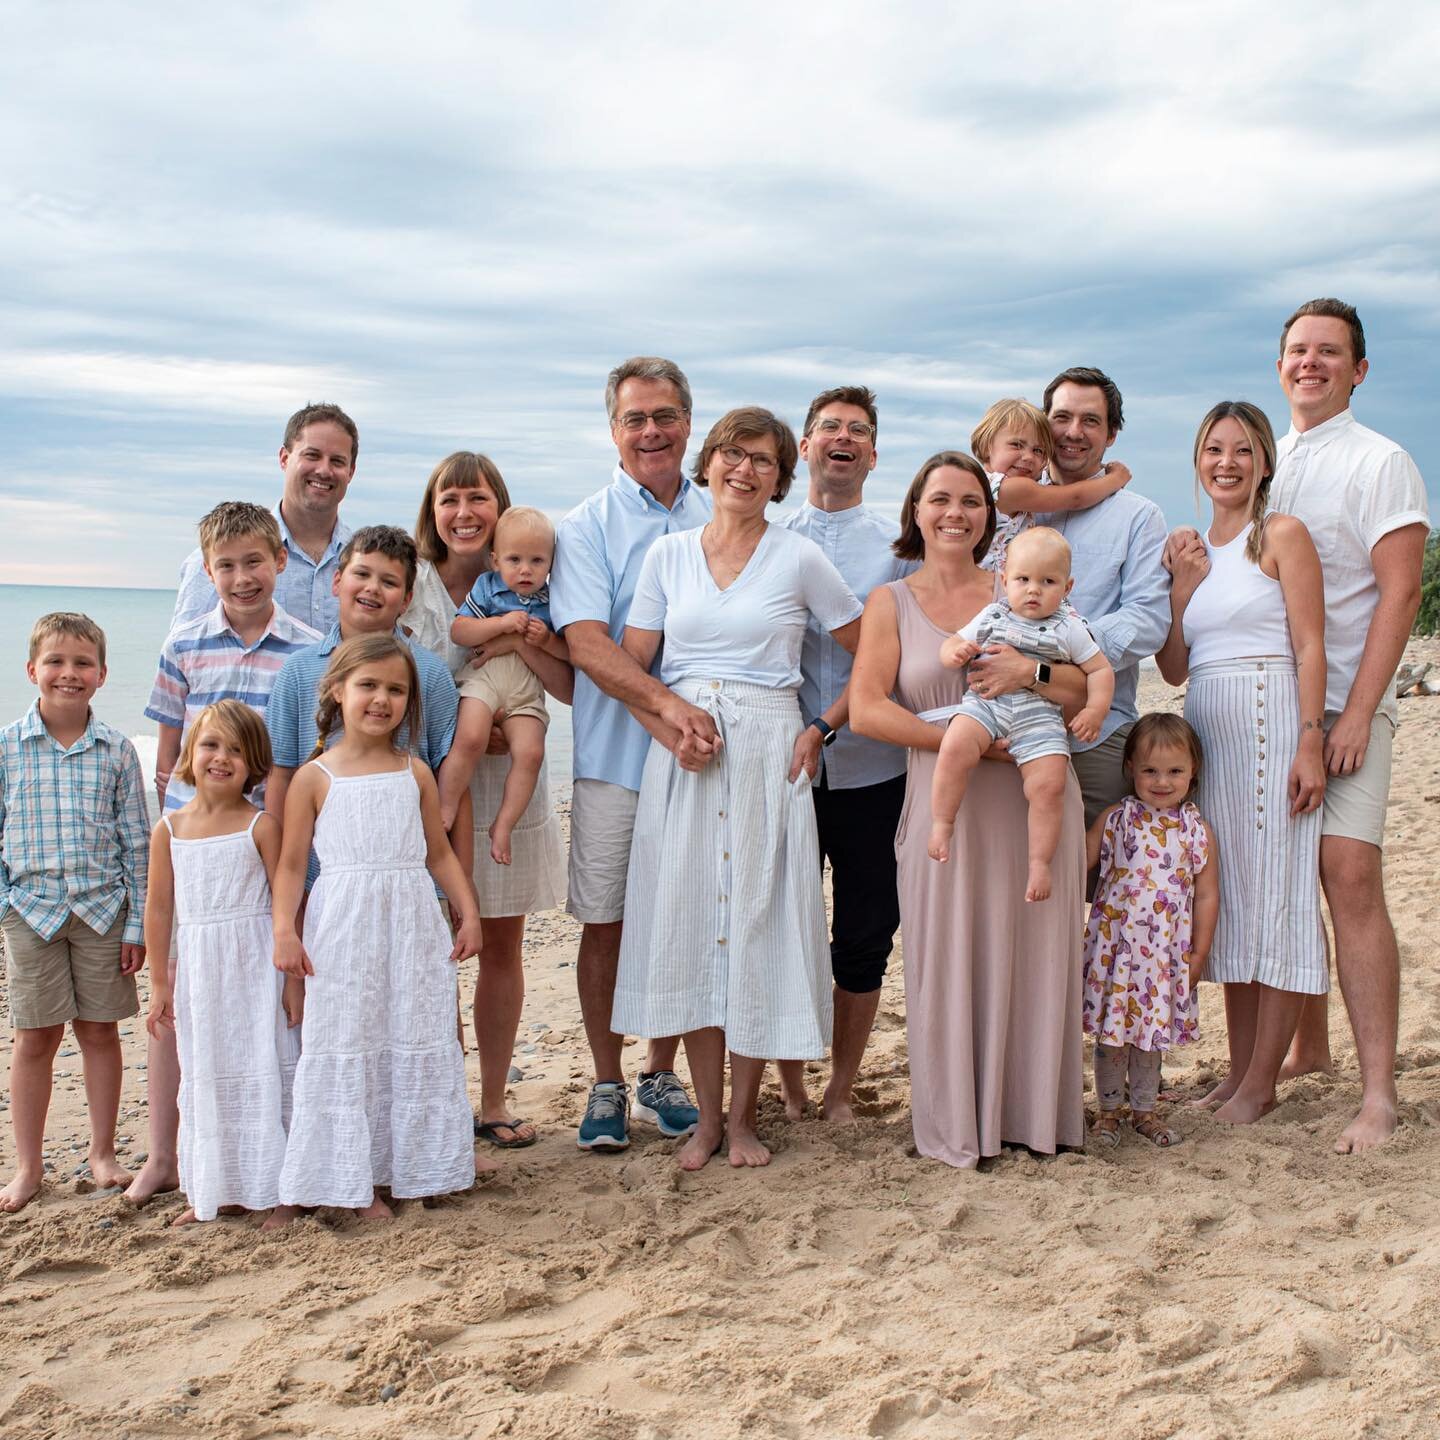 The Ultimate Family Photo&mdash;after over a year apart due to the pandemic, my parents, siblings, and our families finally got together for a Lake Michigan vacation to celebrate my dad&rsquo;s retirement. Although posing on the beach in color-coordi